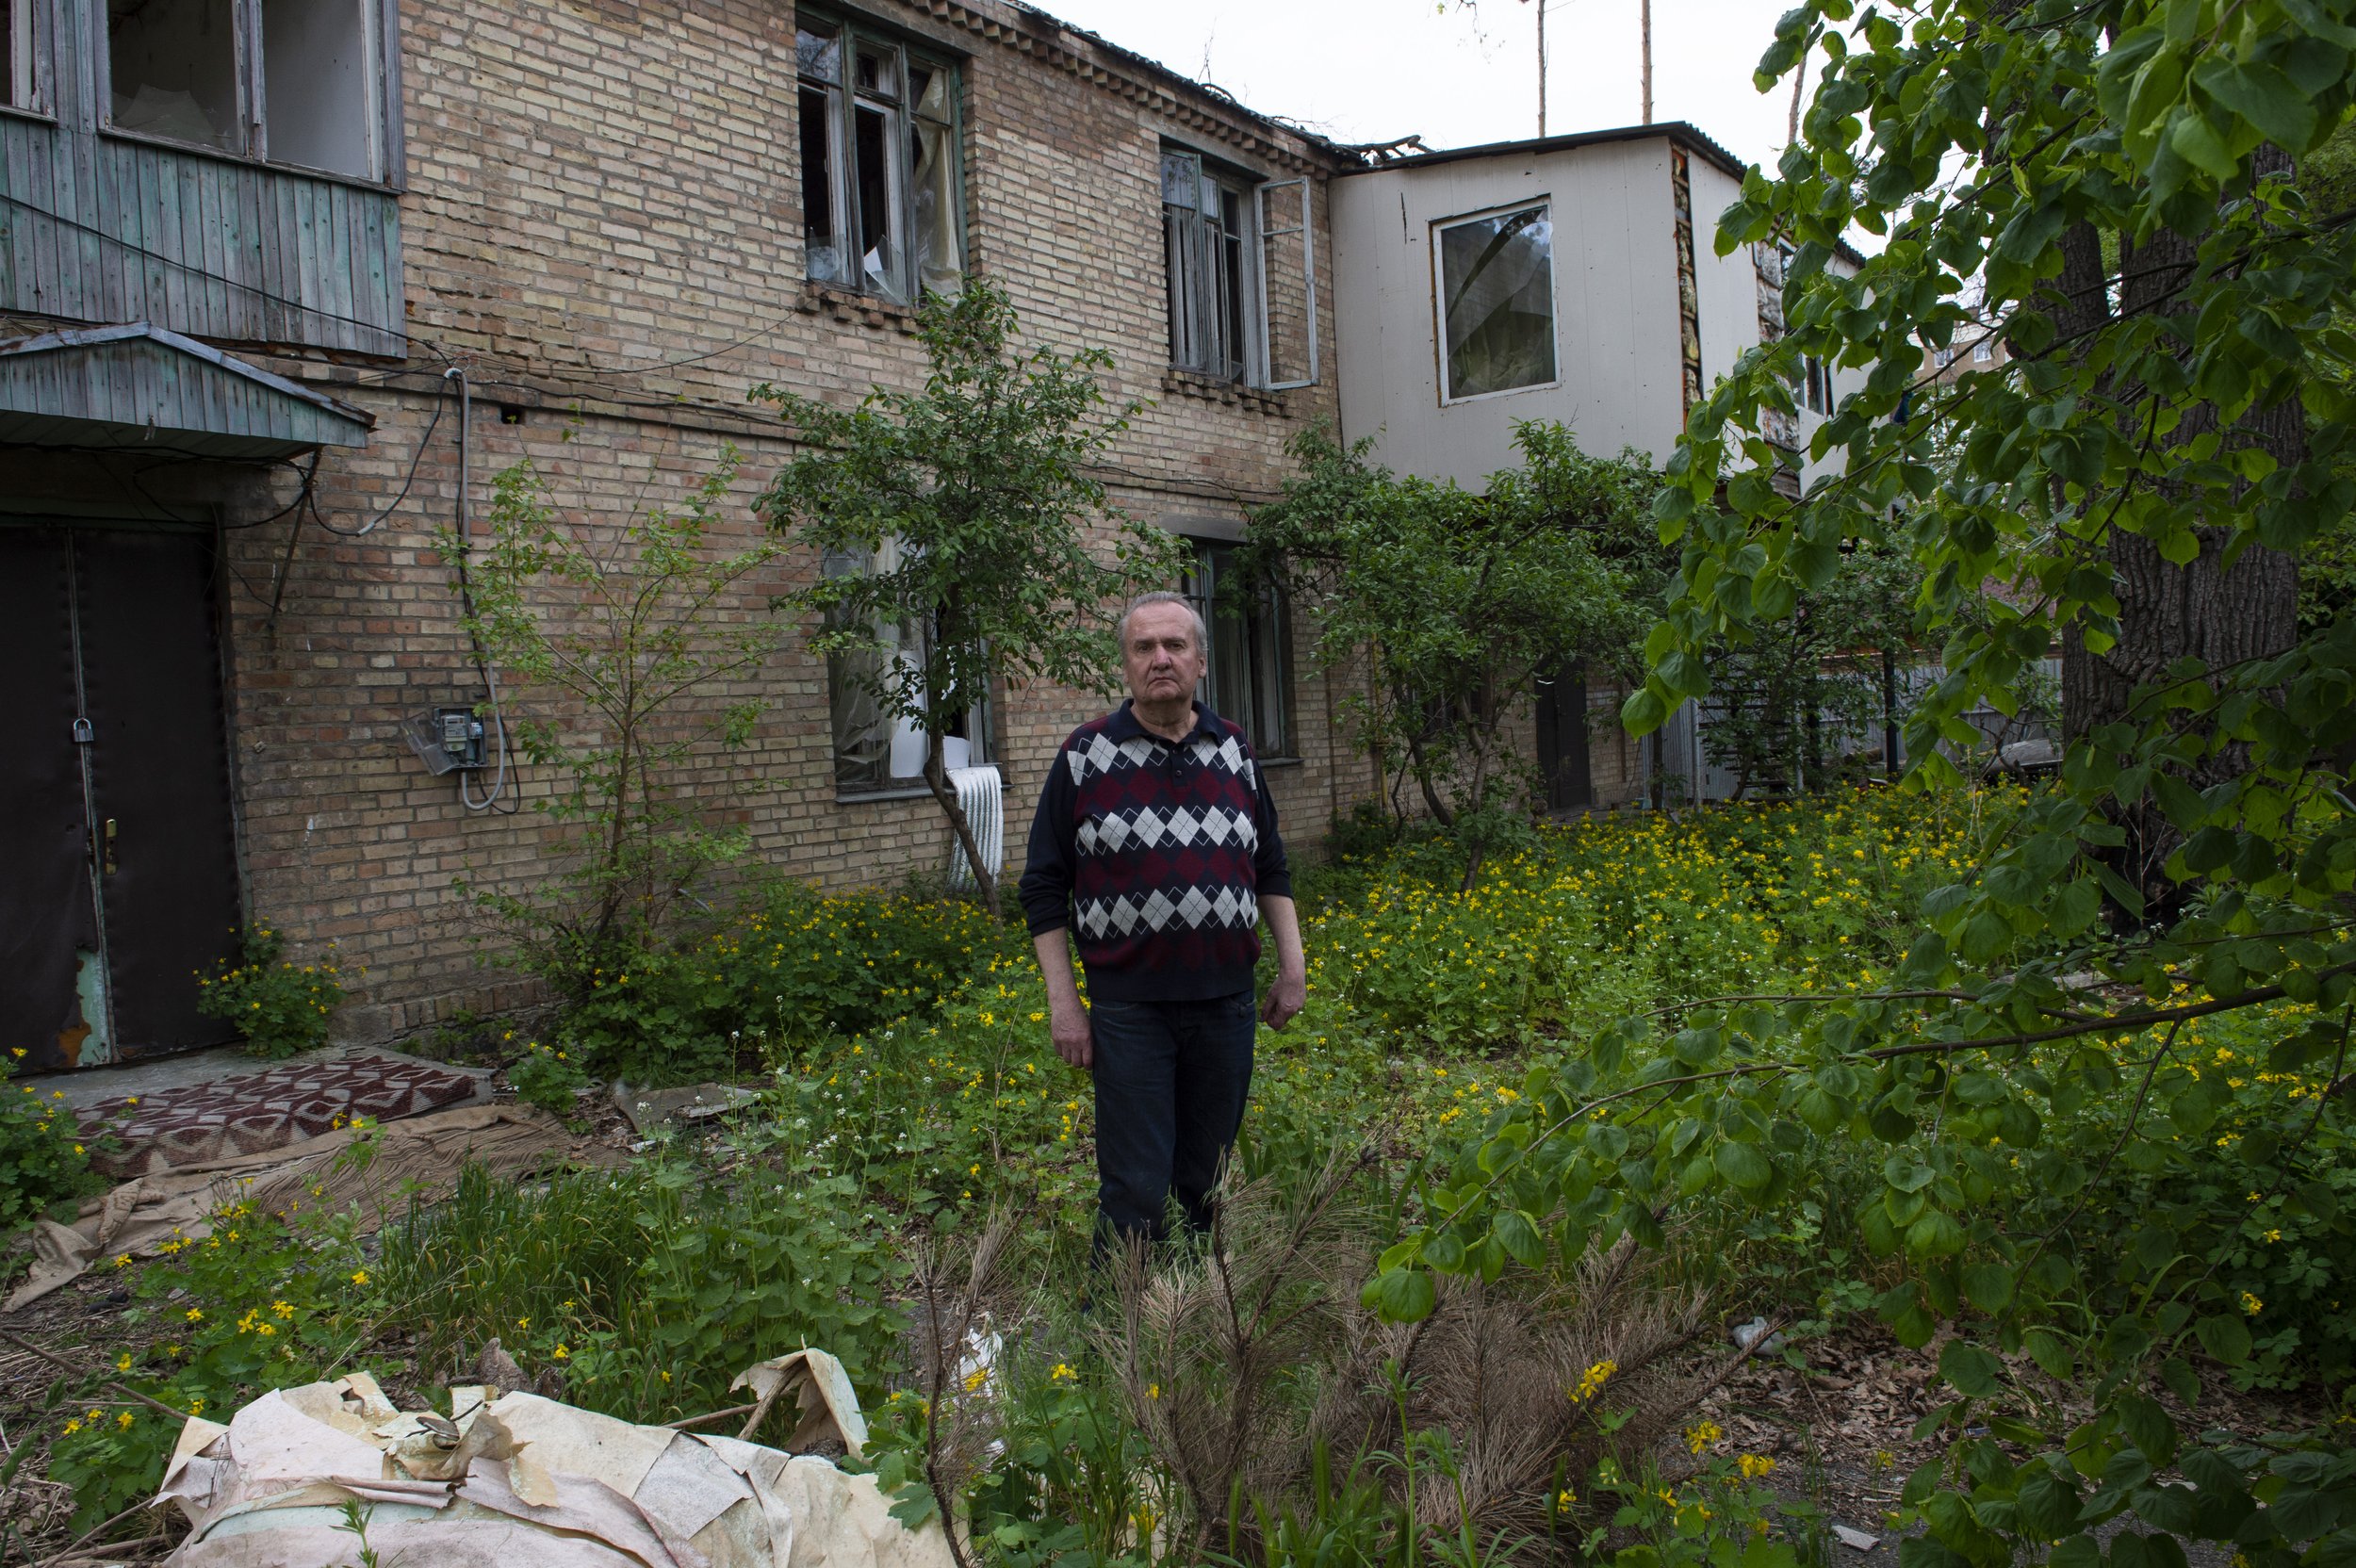  Yehor, a resident of Irpin, poses for a portrait in the yard of his destroyed home on May 18, 2023. Irpin and other suburbs of Ukraine were the scenes of heavy fighting between Ukrainian and Russian troops in 2022, one year later much of the damage 